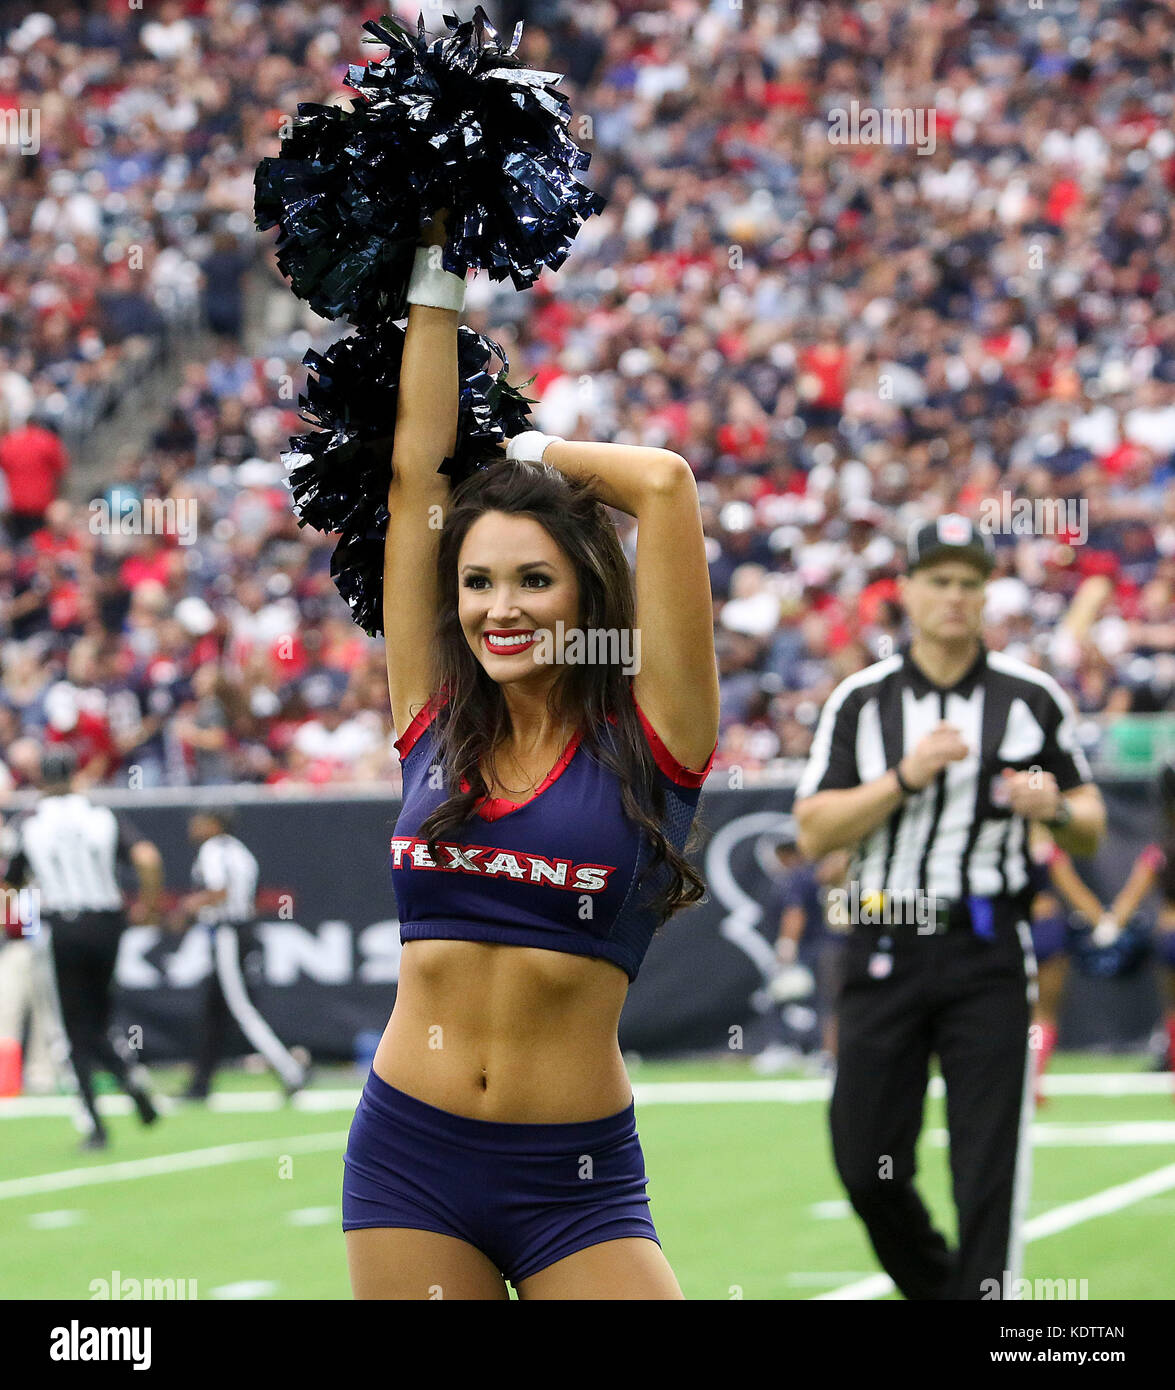 Houston, TX, USA. 15th Oct, 2017. Houston Texans cheerleader during the NFL game between the Cleveland Browns and the Houston Texans at NRG Stadium in Houston, TX. John Glaser/CSM/Alamy Live News Stock Photo